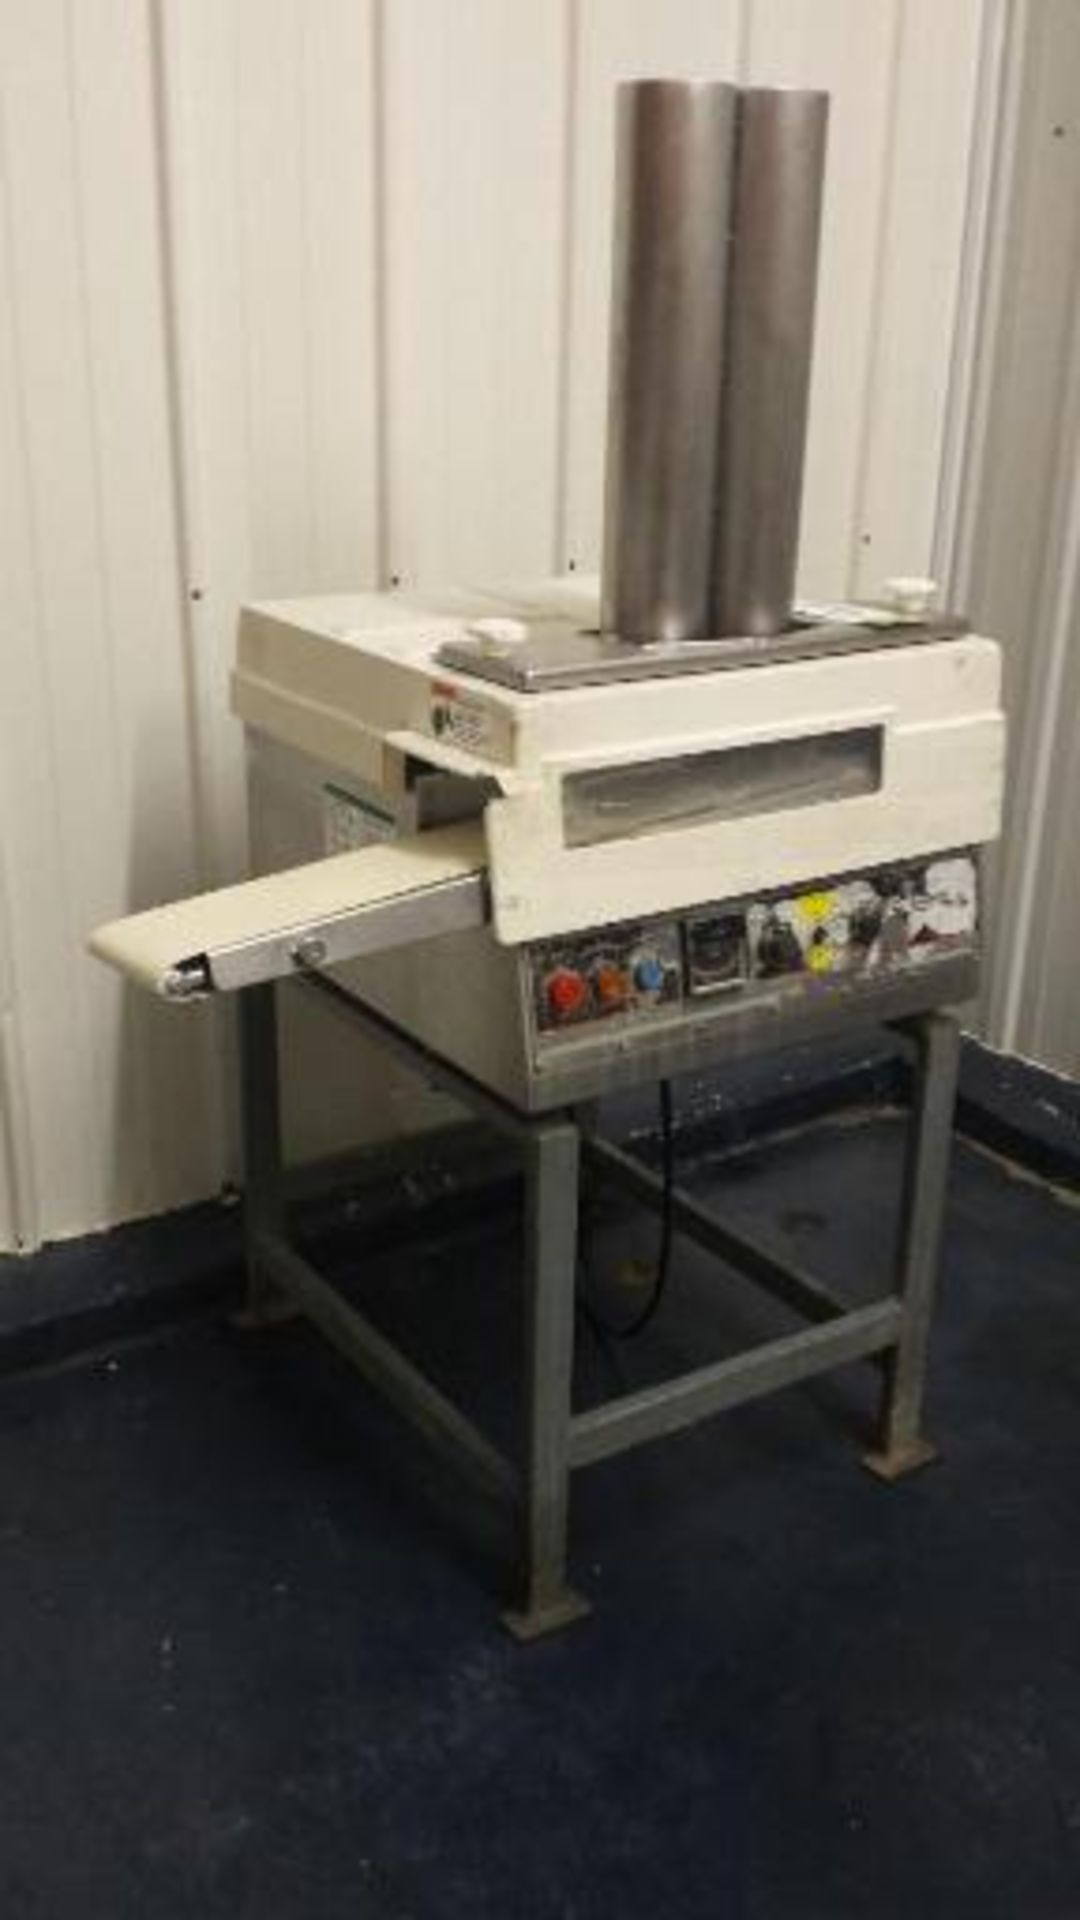 Bettcher Automatic Slicer Ultimax, single phase, S/N: 2988110248, Located in North Dakota (NOT OWNED - Image 2 of 5